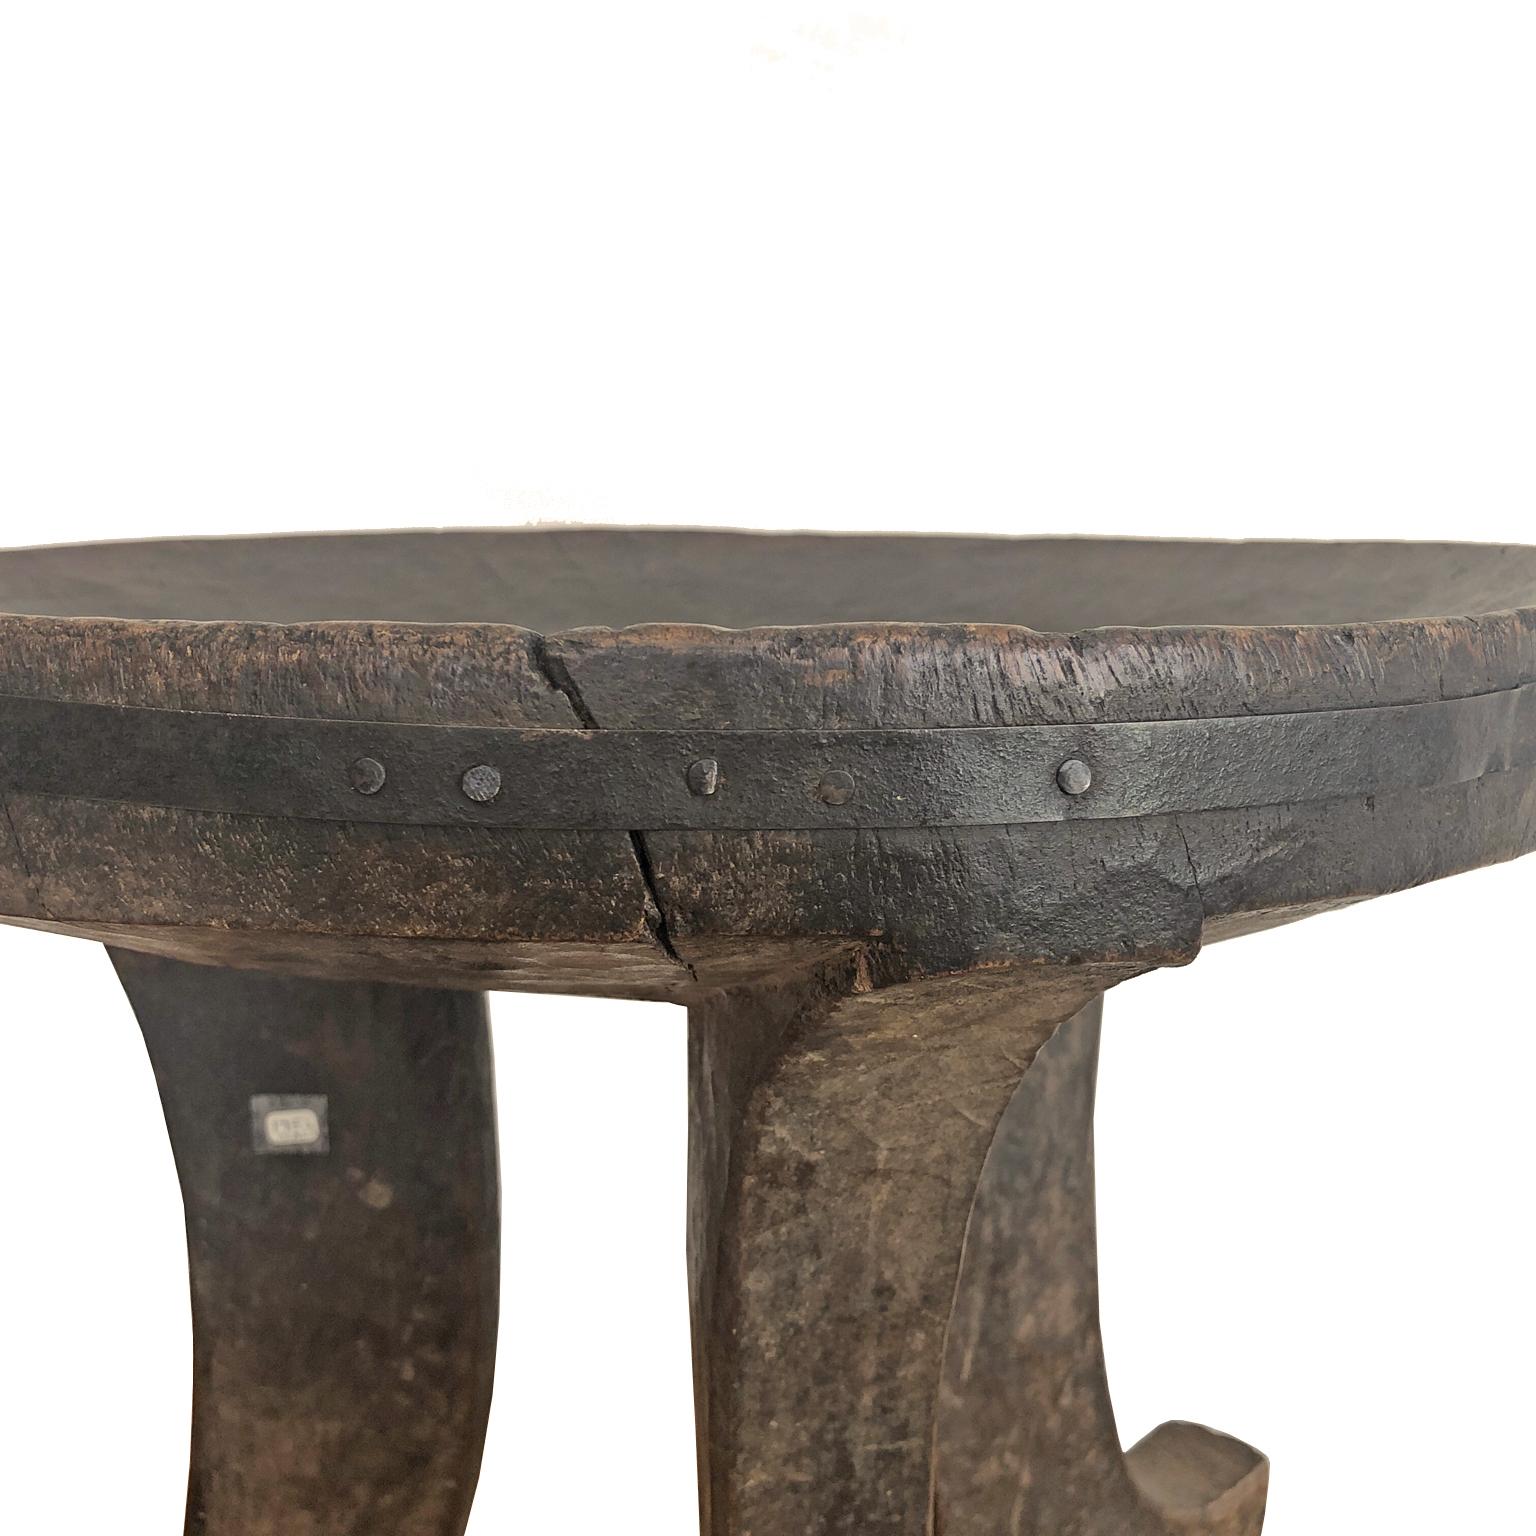 which african people place a high value on wooden stools